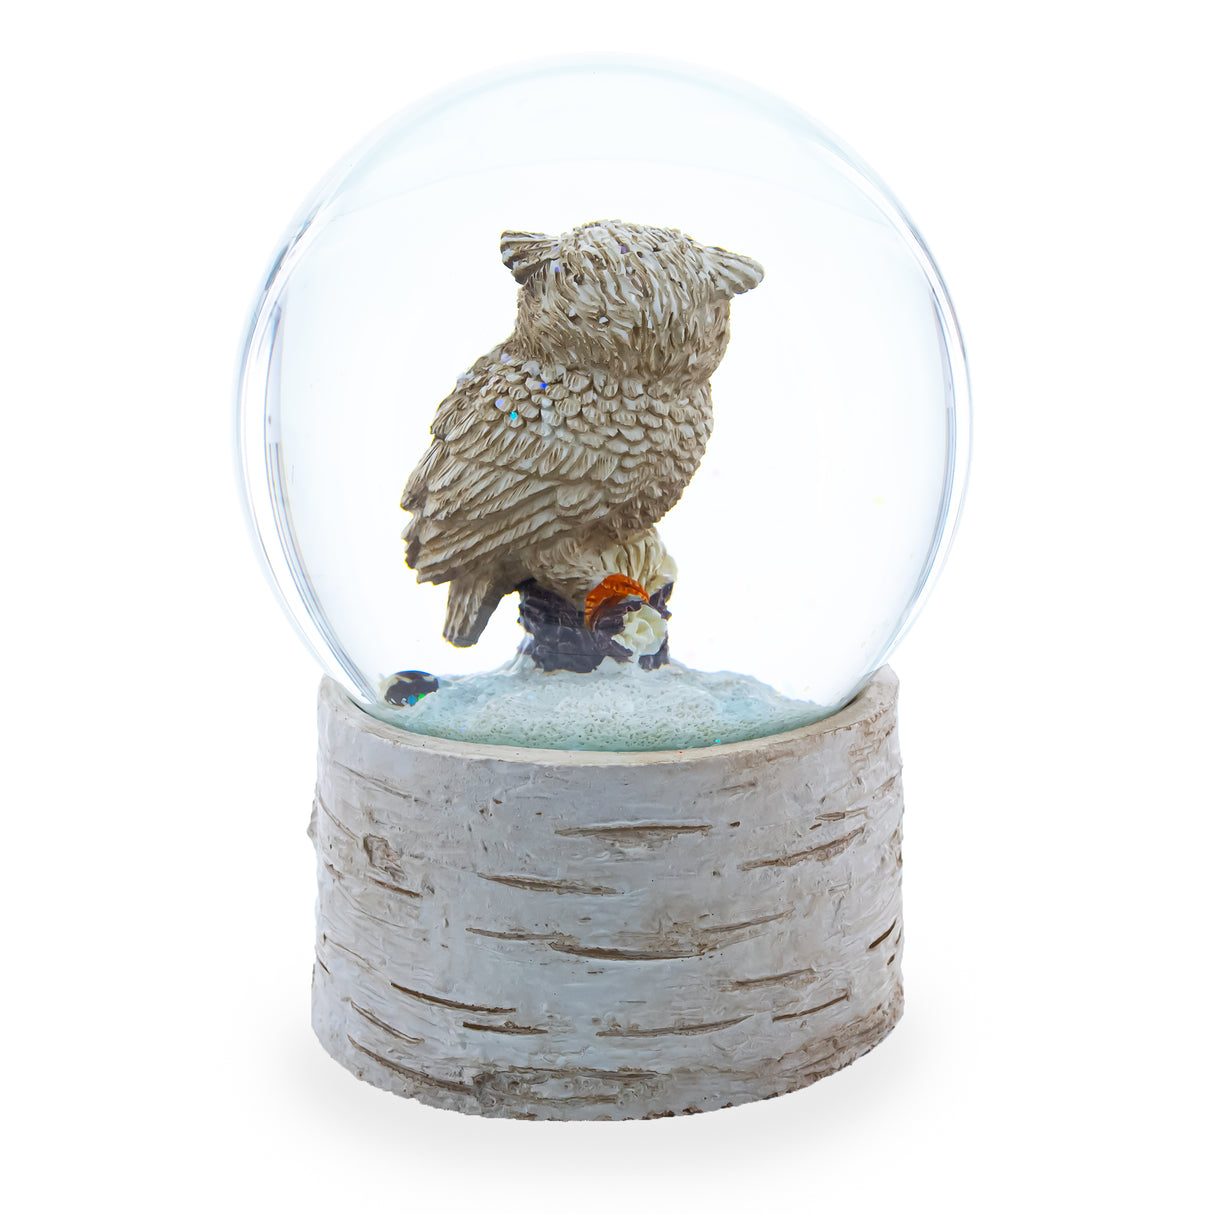 Melodic Owl Perched on Tree Branch: Musical Water Snow Globe ,dimensions in inches: 5.5 x 3.3 x